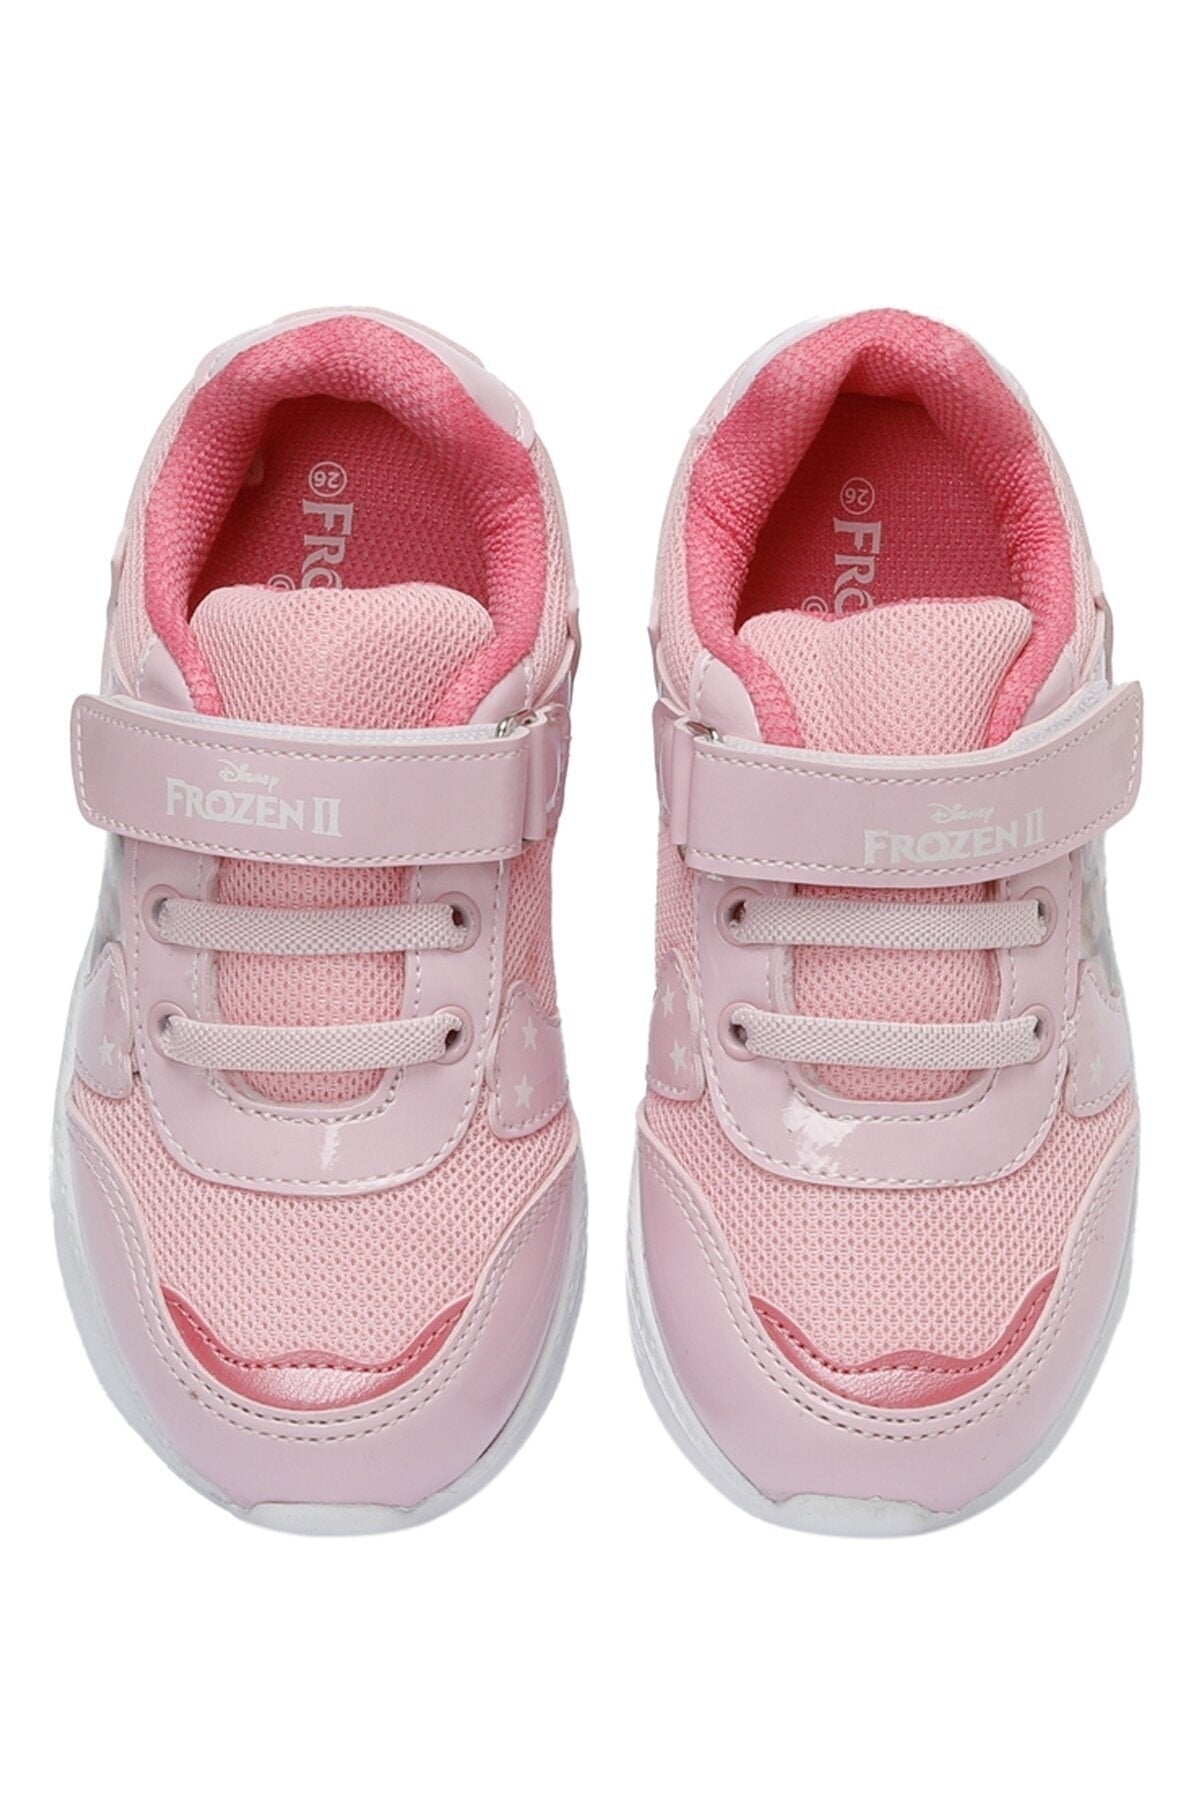 Yedy.p3fx Pink Girls' Sneakers